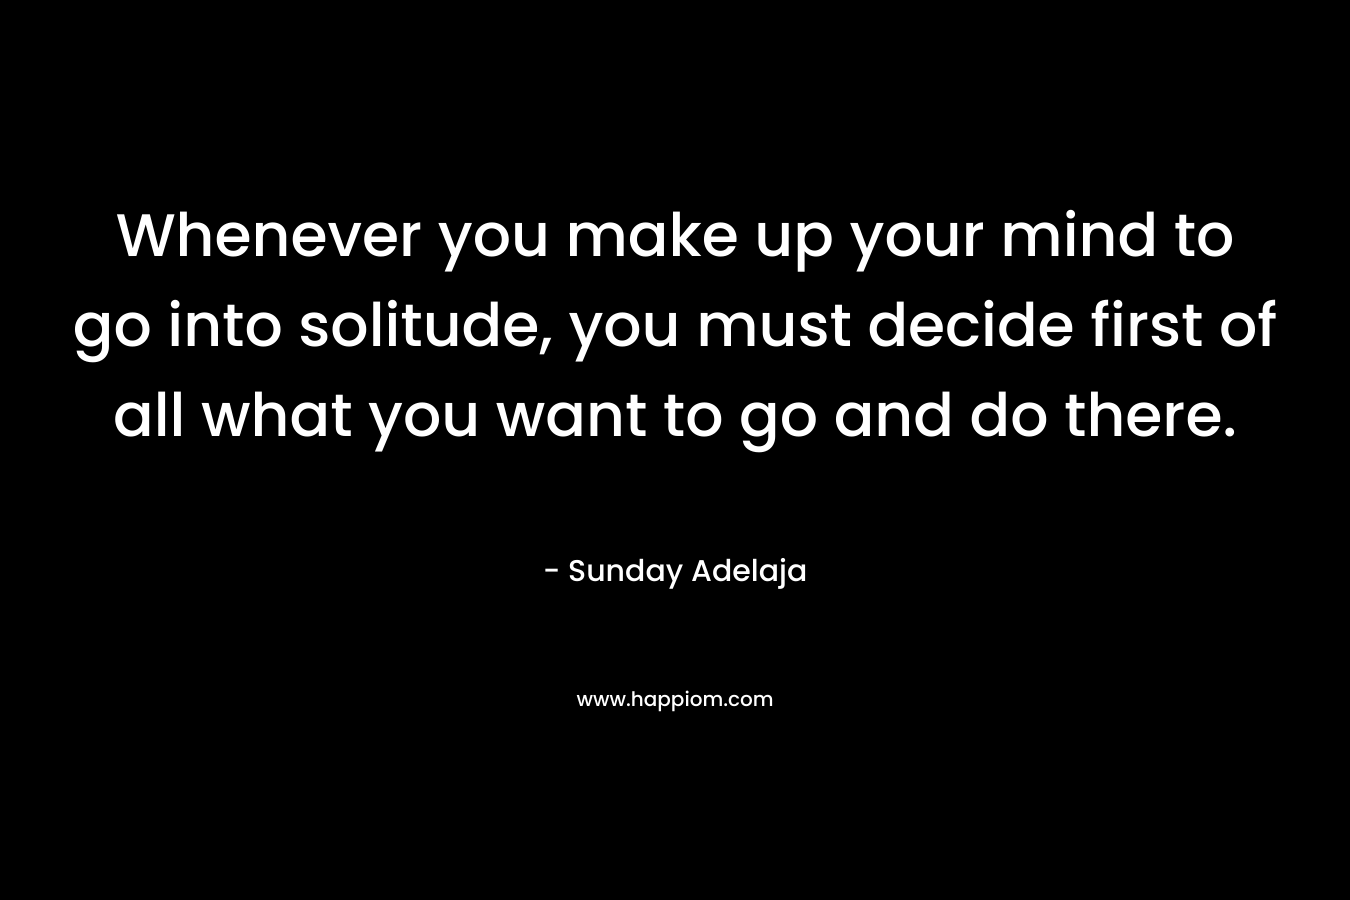 Whenever you make up your mind to go into solitude, you must decide first of all what you want to go and do there.